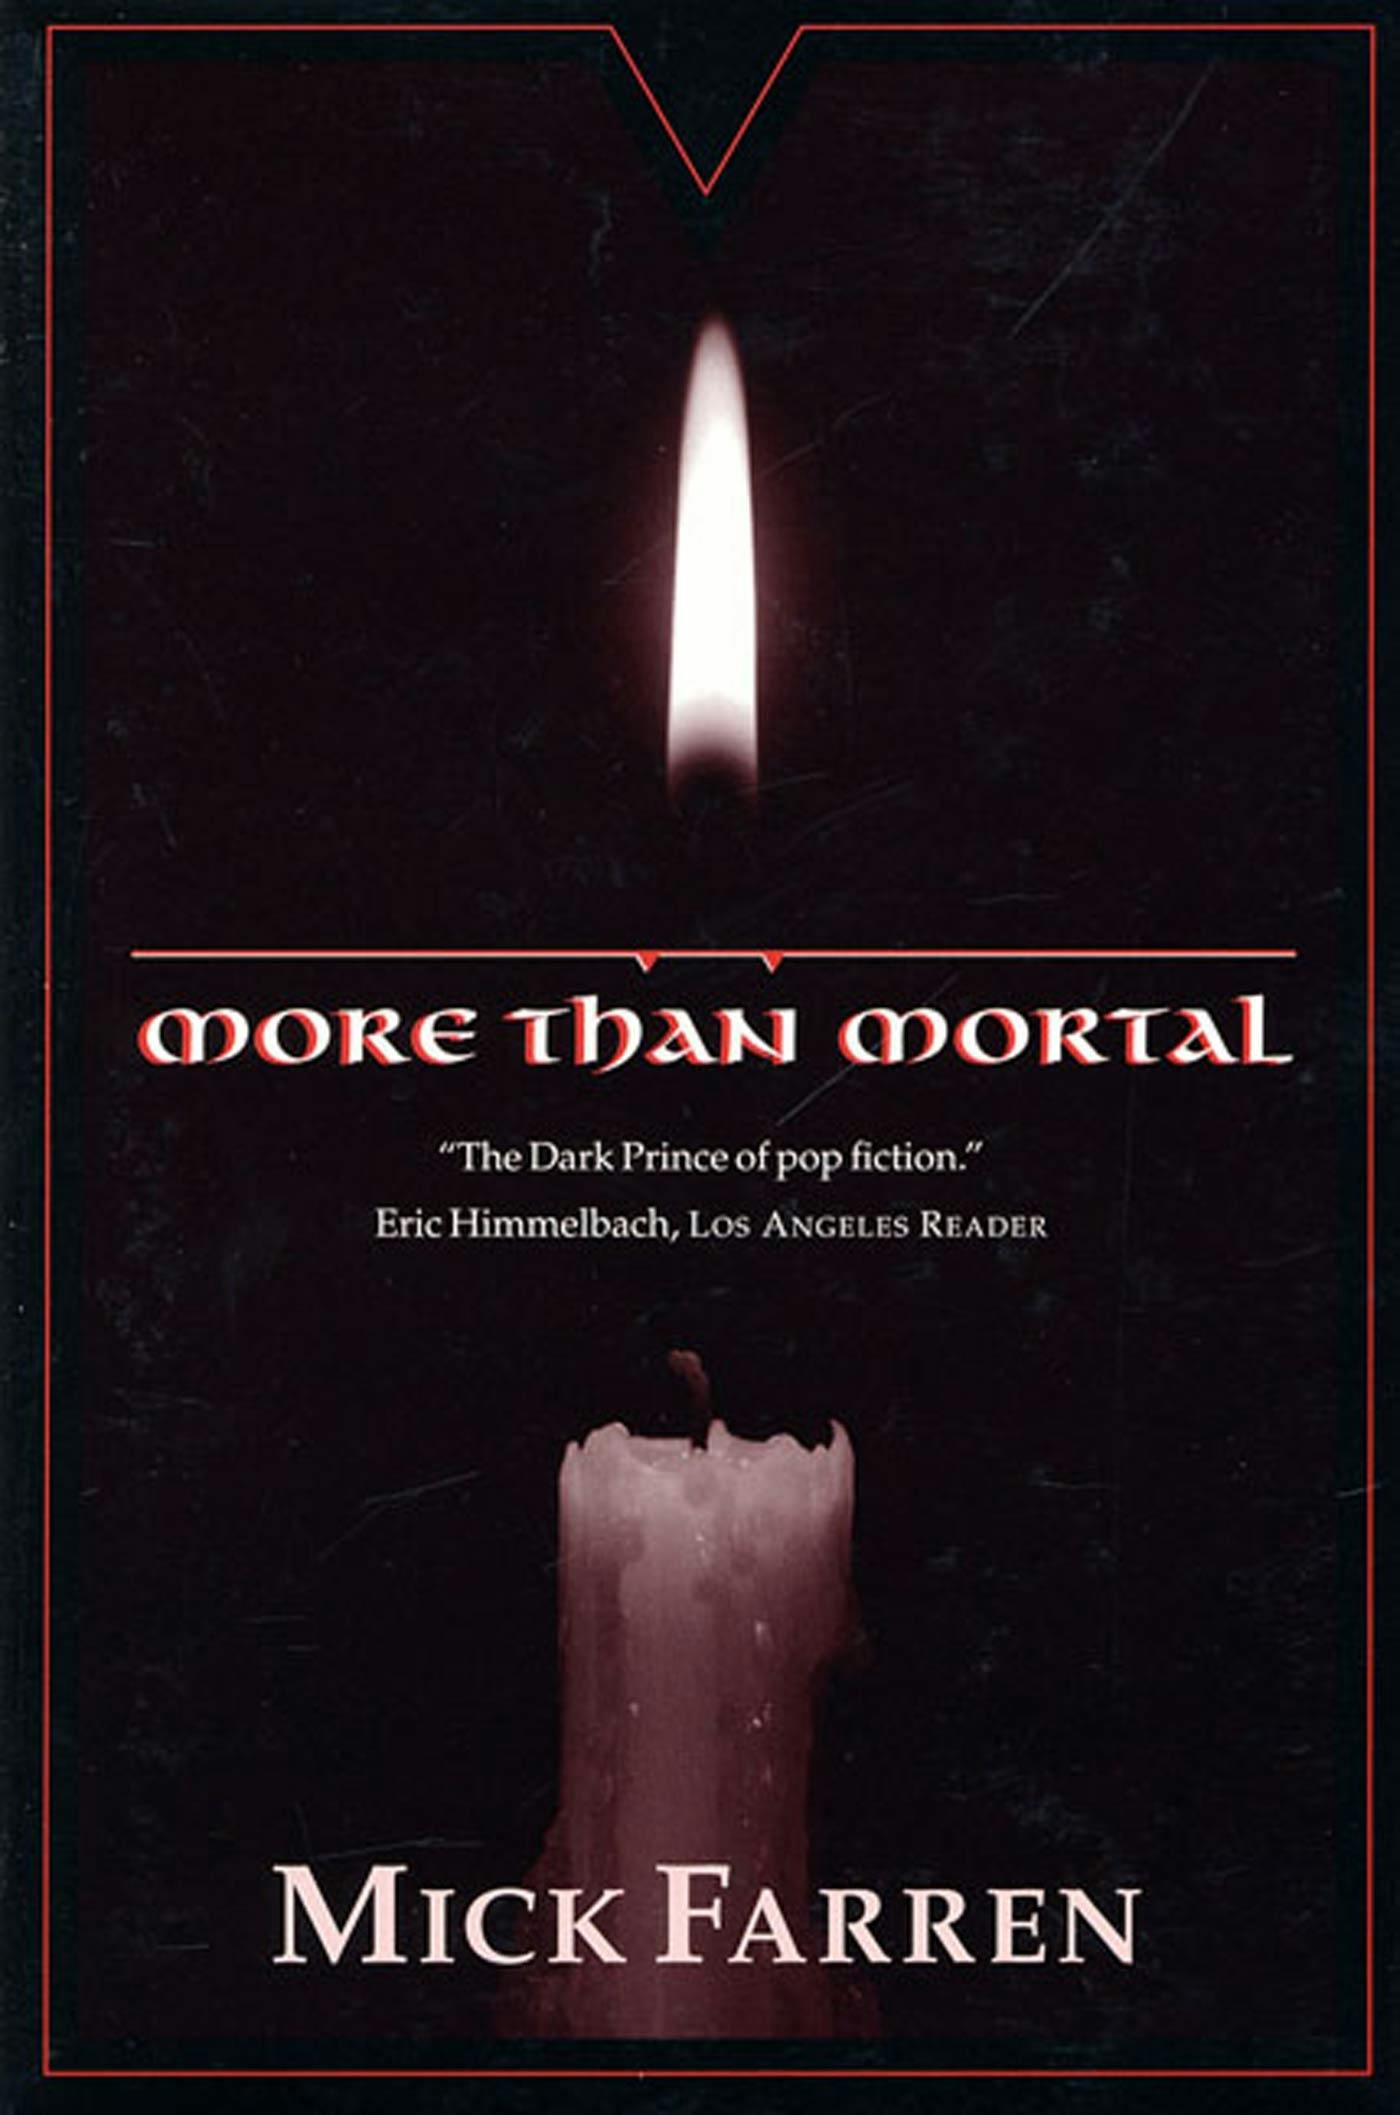 Cover for the book titled as: More Than Mortal